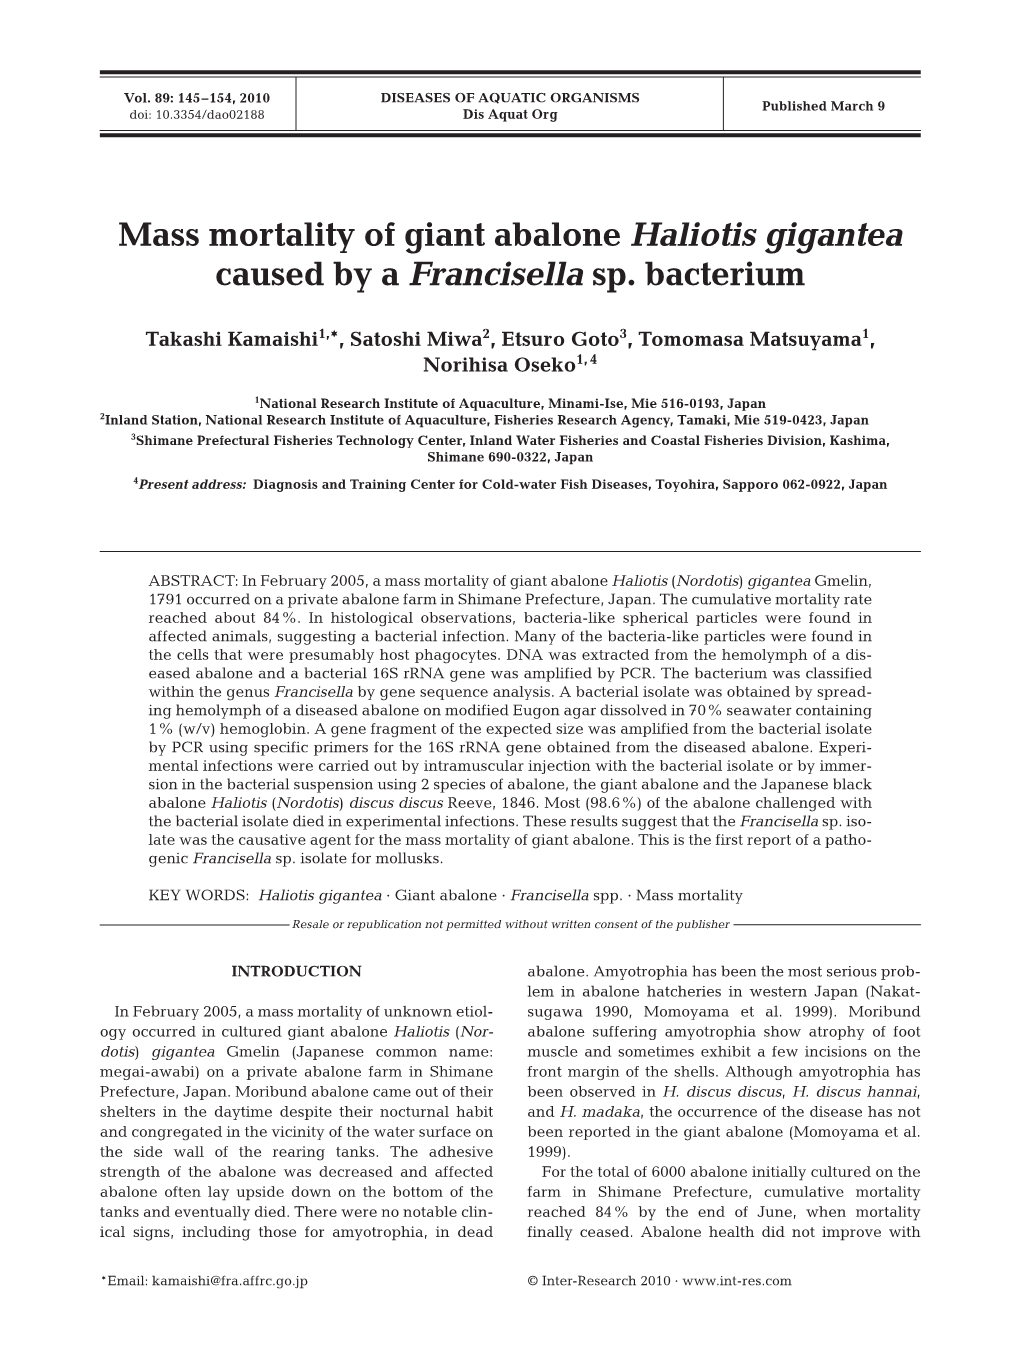 Mass Mortality of Giant Abalone Haliotis Gigantea Caused by a Francisella Sp